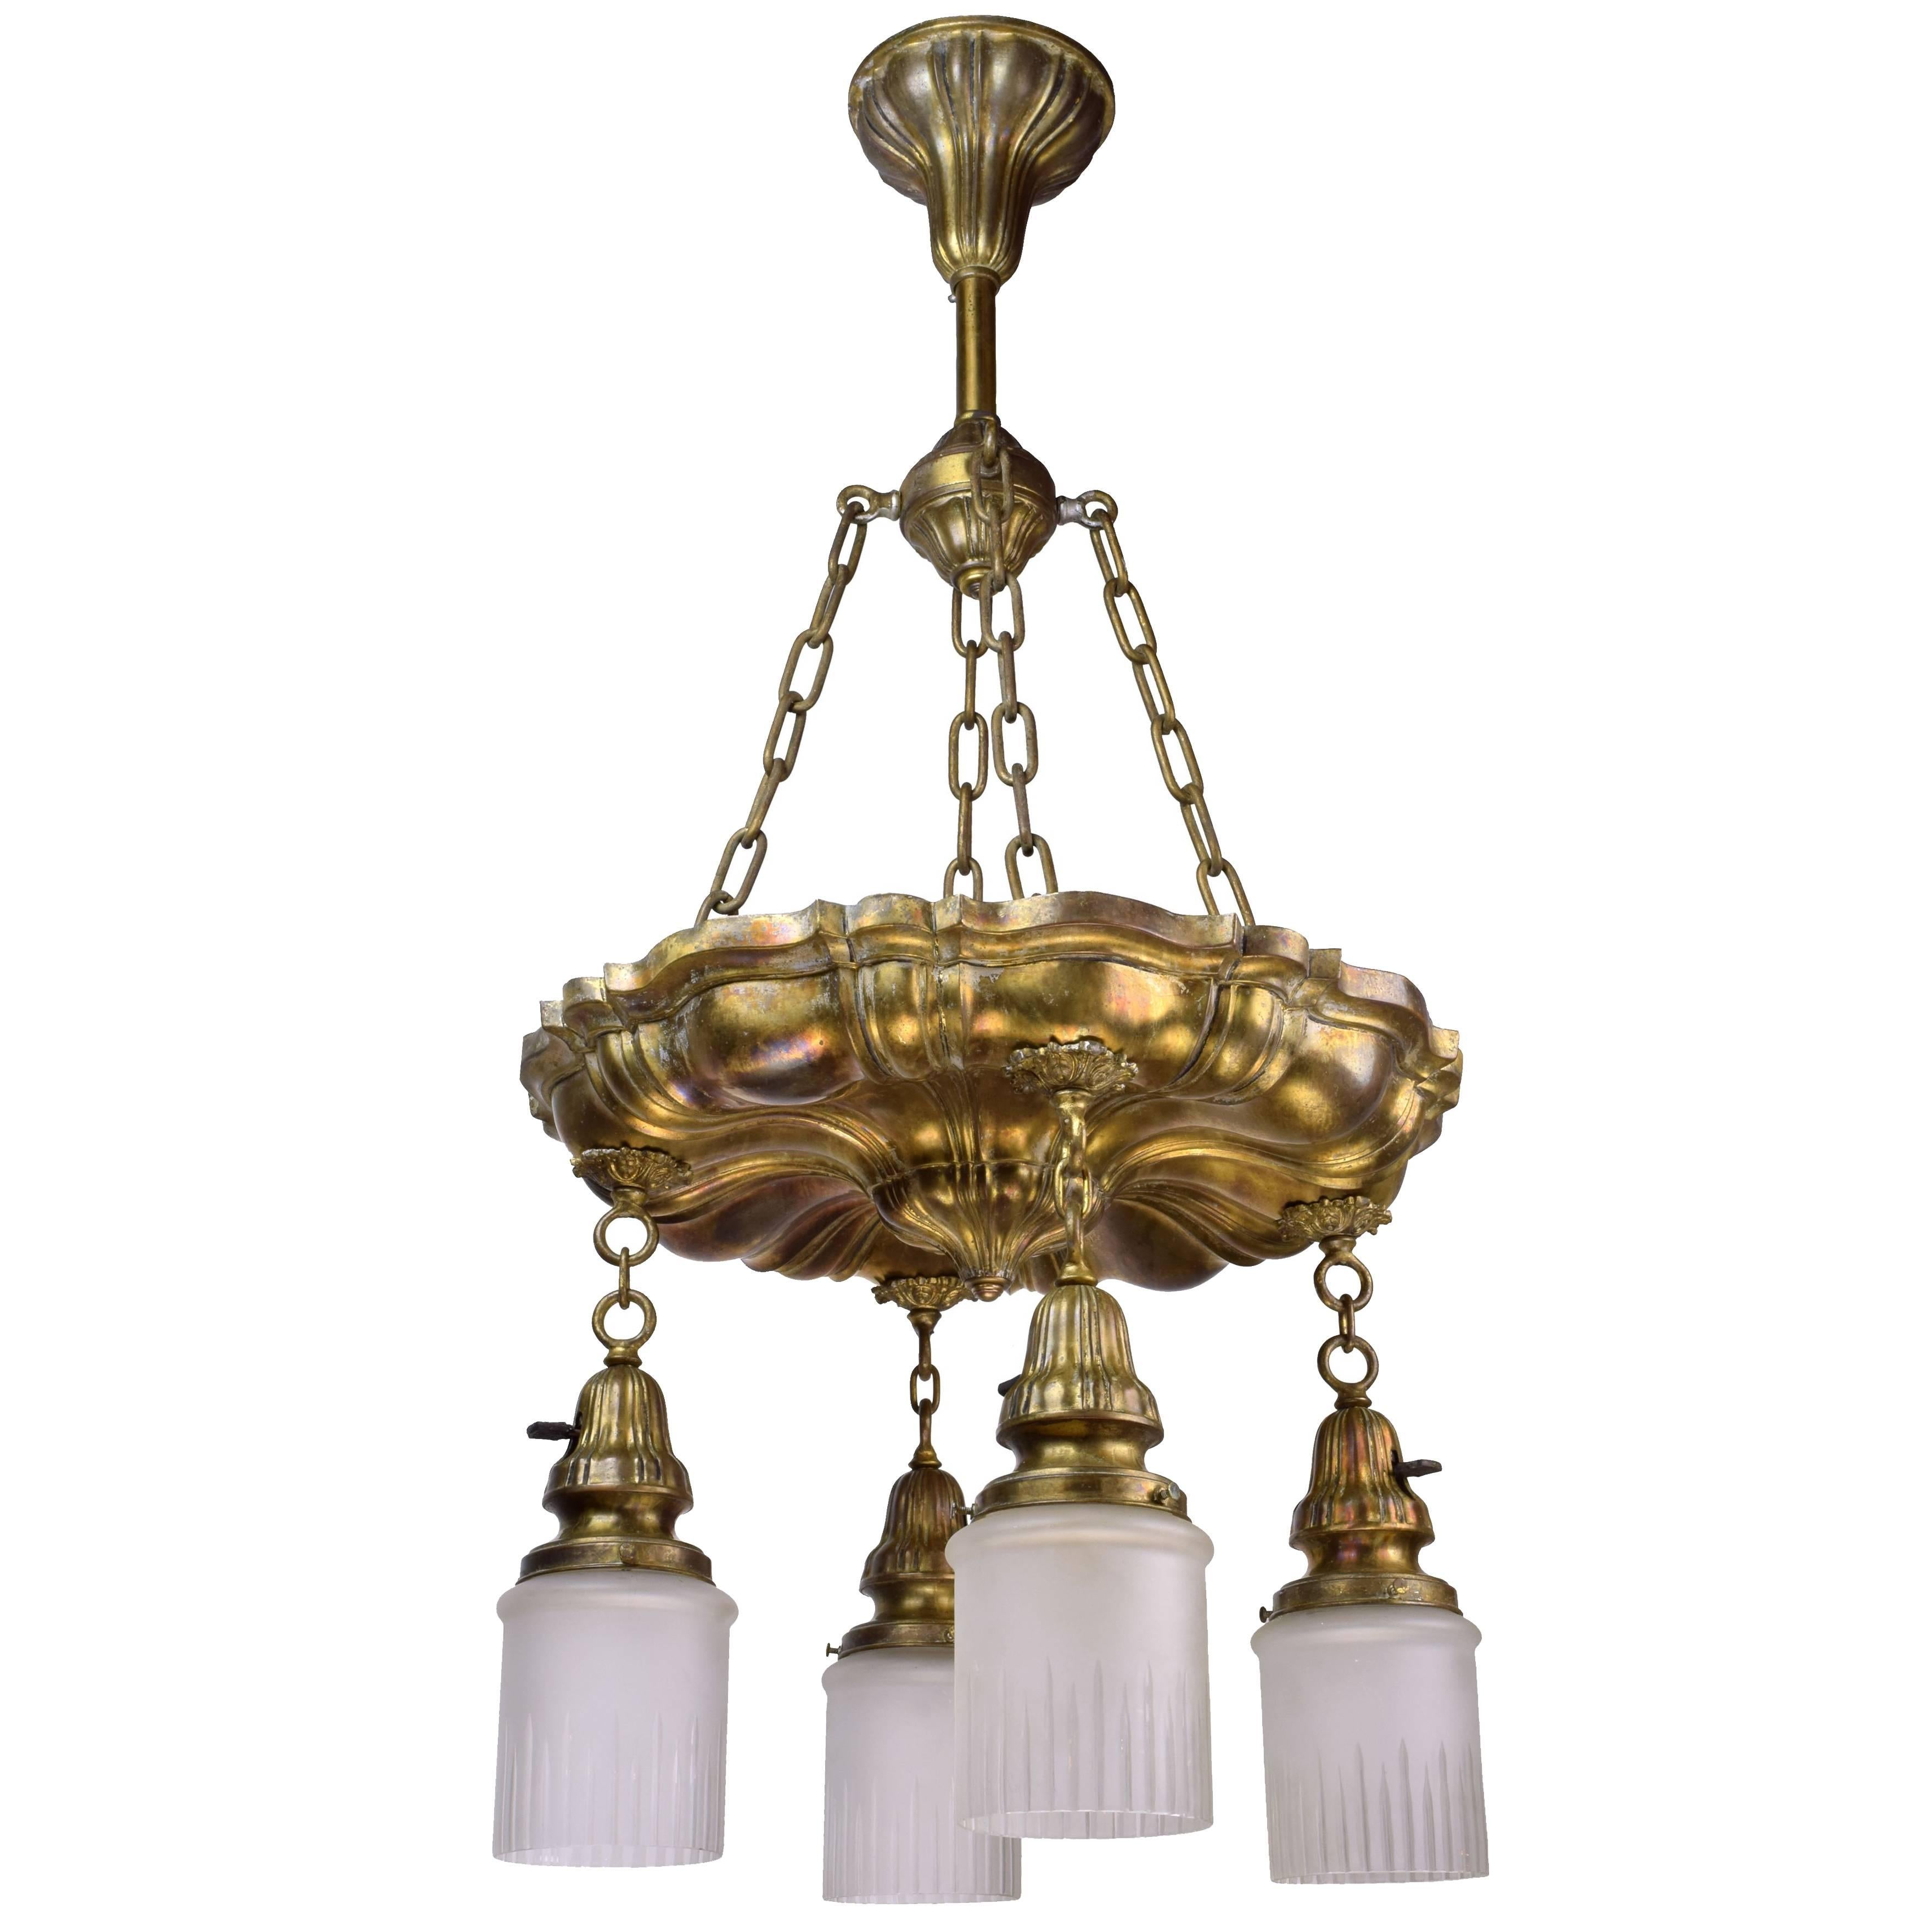 Gorgeous brass pan fixture with the distinctive shell-like ribbing and elegant lines indicative of the Sheffield style. The brass has incredible patina of almost iridescent hues that catch the light in dazzling ways. This fixture comes compete with